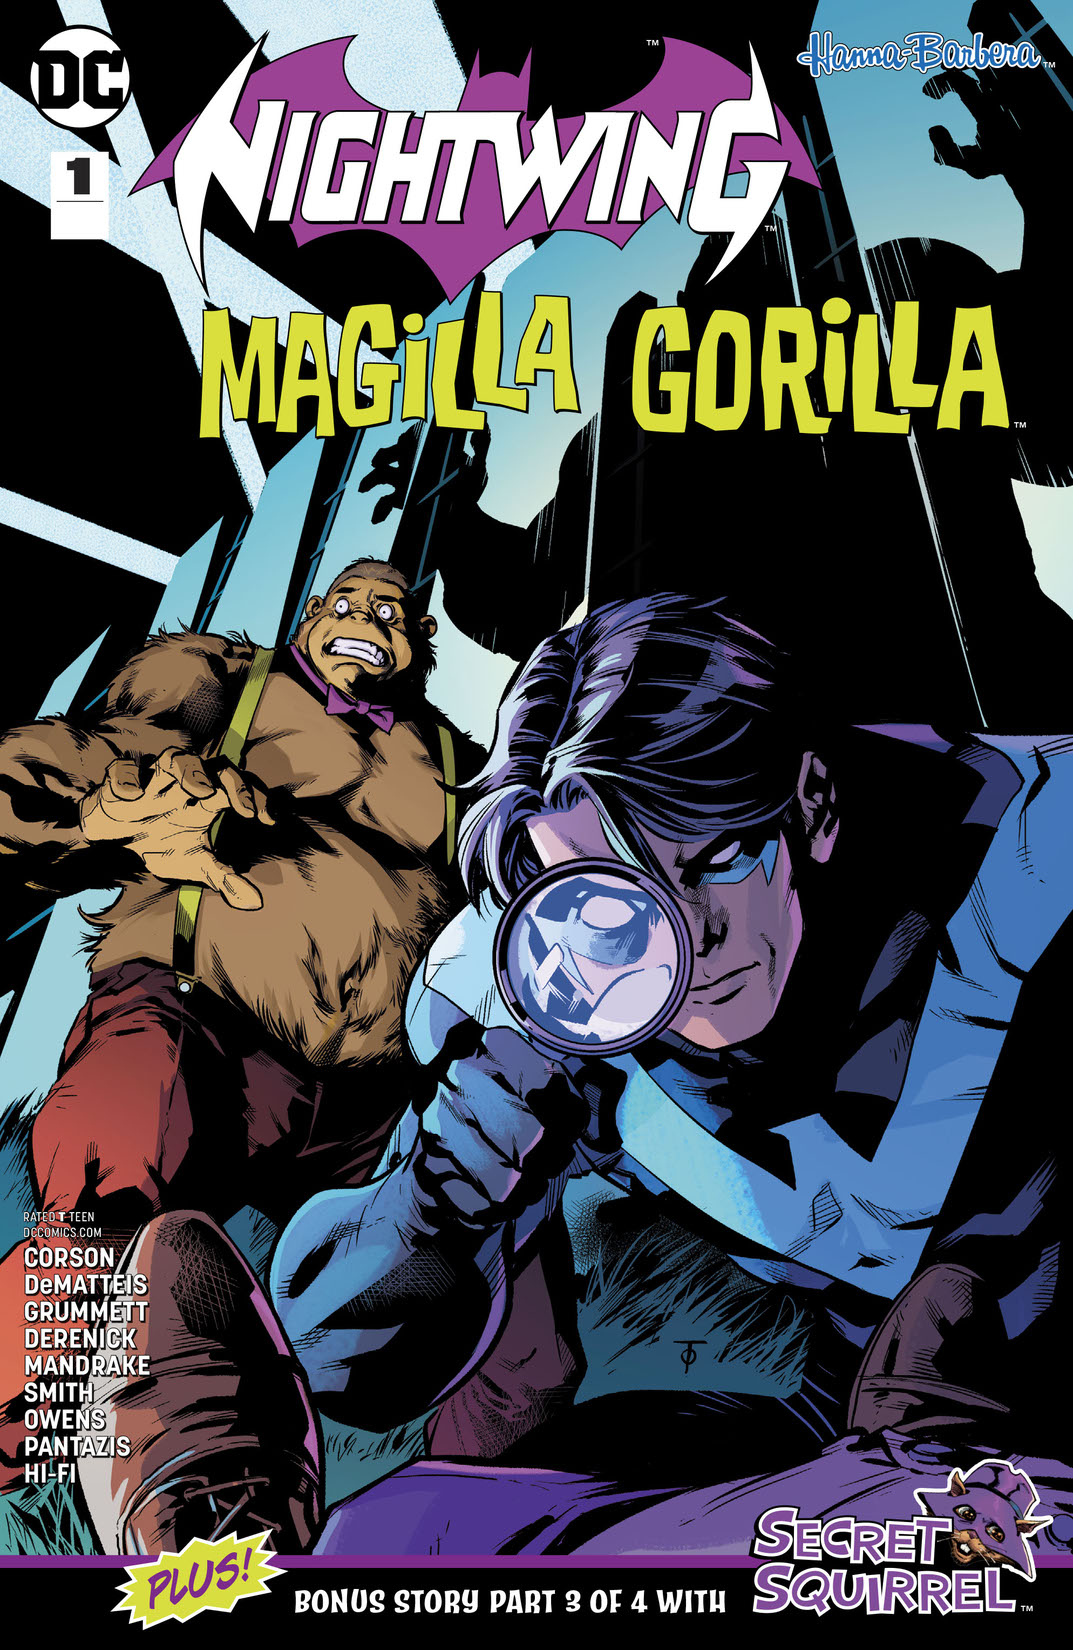 Nightwing/Magilla Gorilla Special #1 preview images